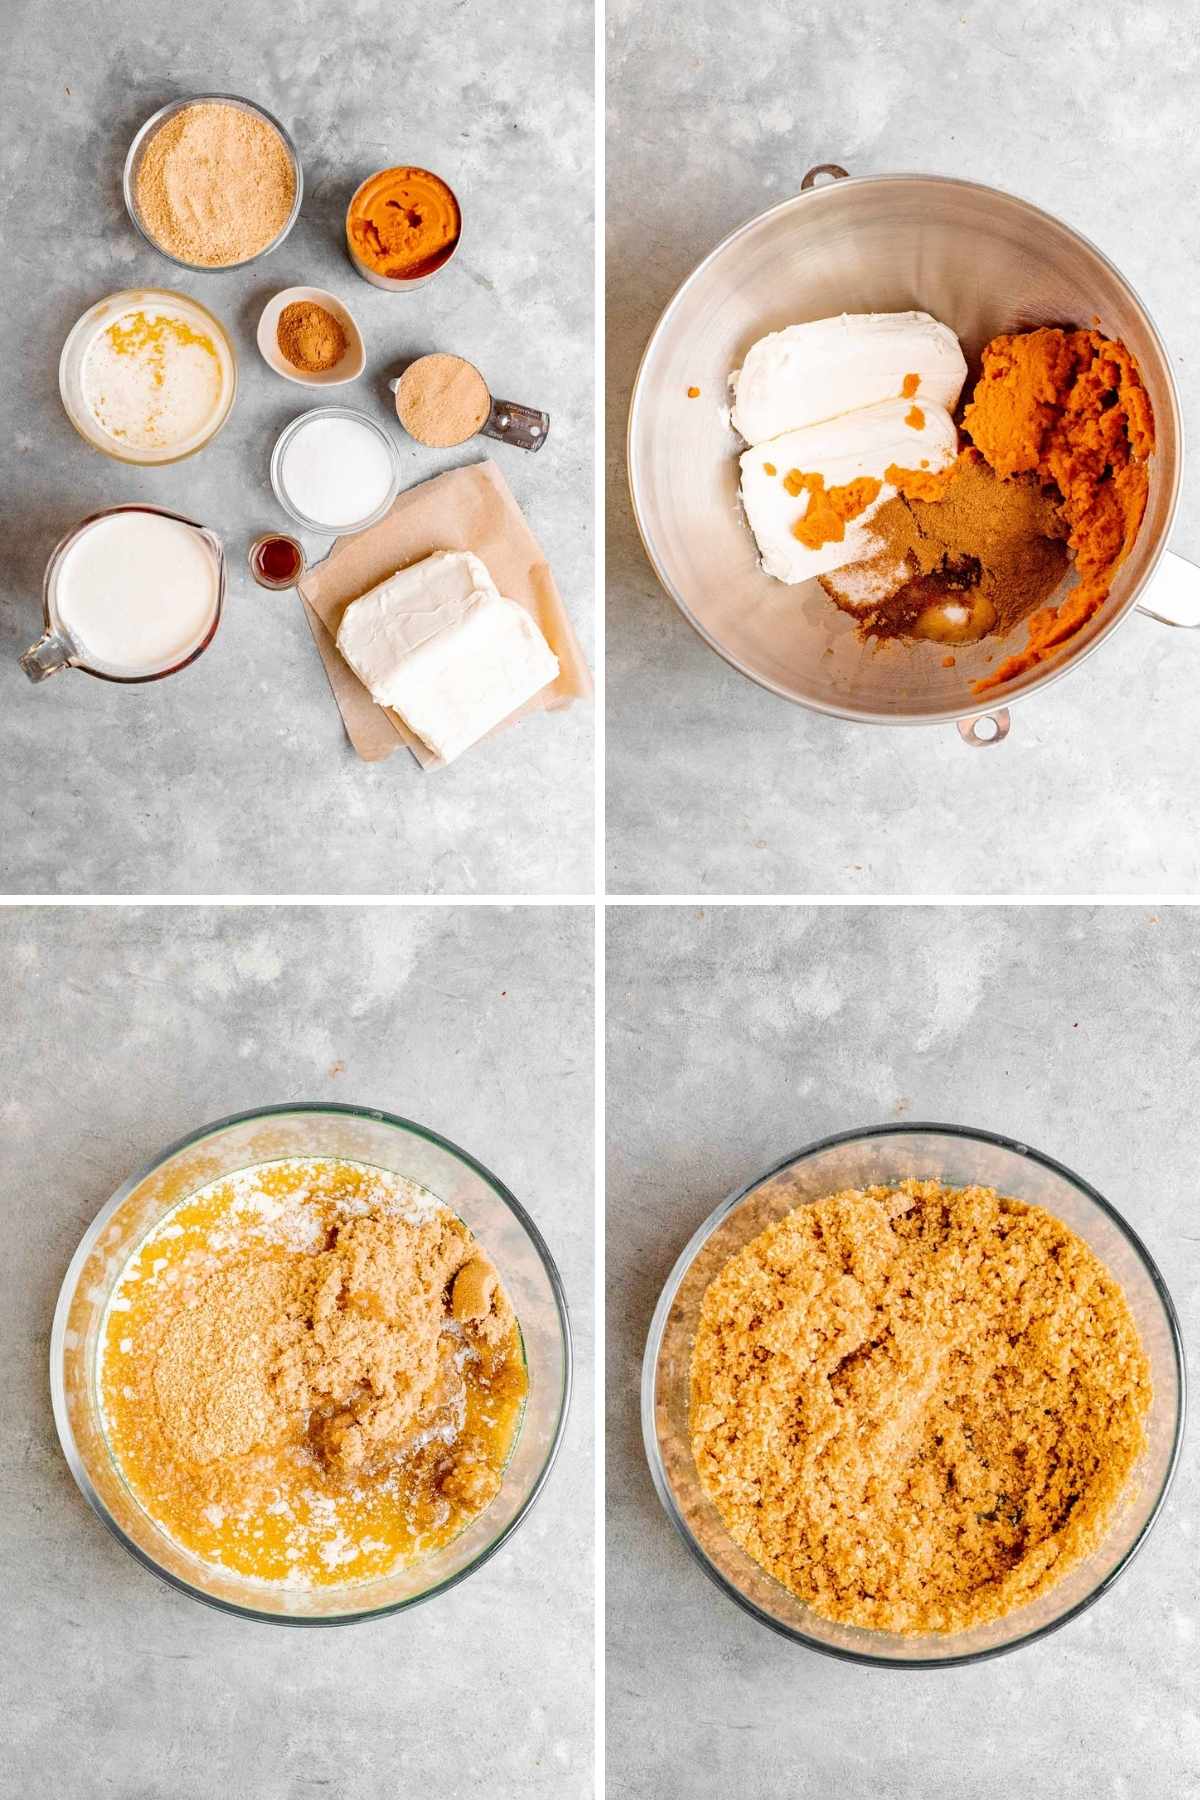 Collage of ingredients and steps for No-Bake Pumpkin Cheesecake